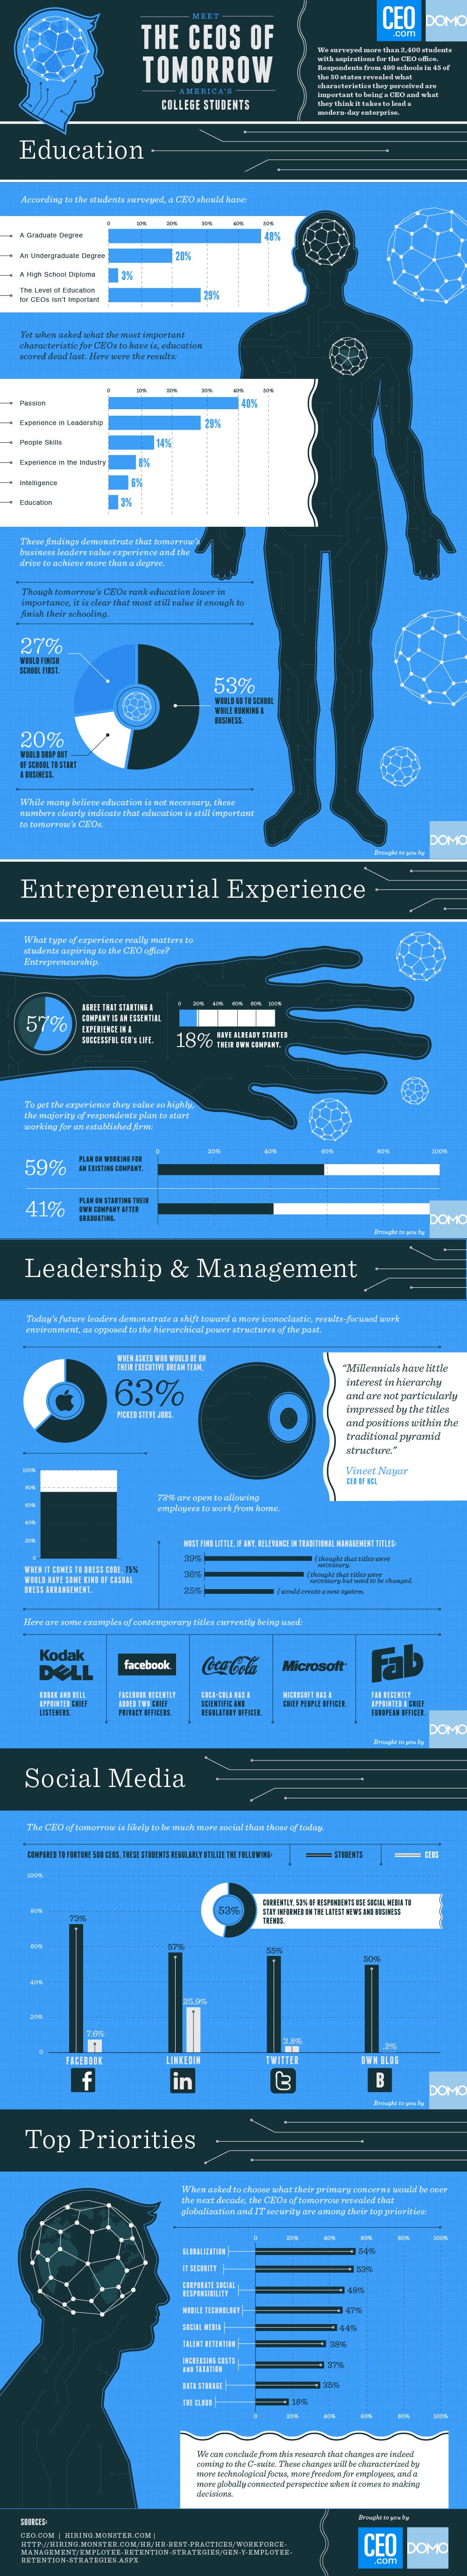 Student Survey: Meet The CEOs Of Tomorrow [Infographic]